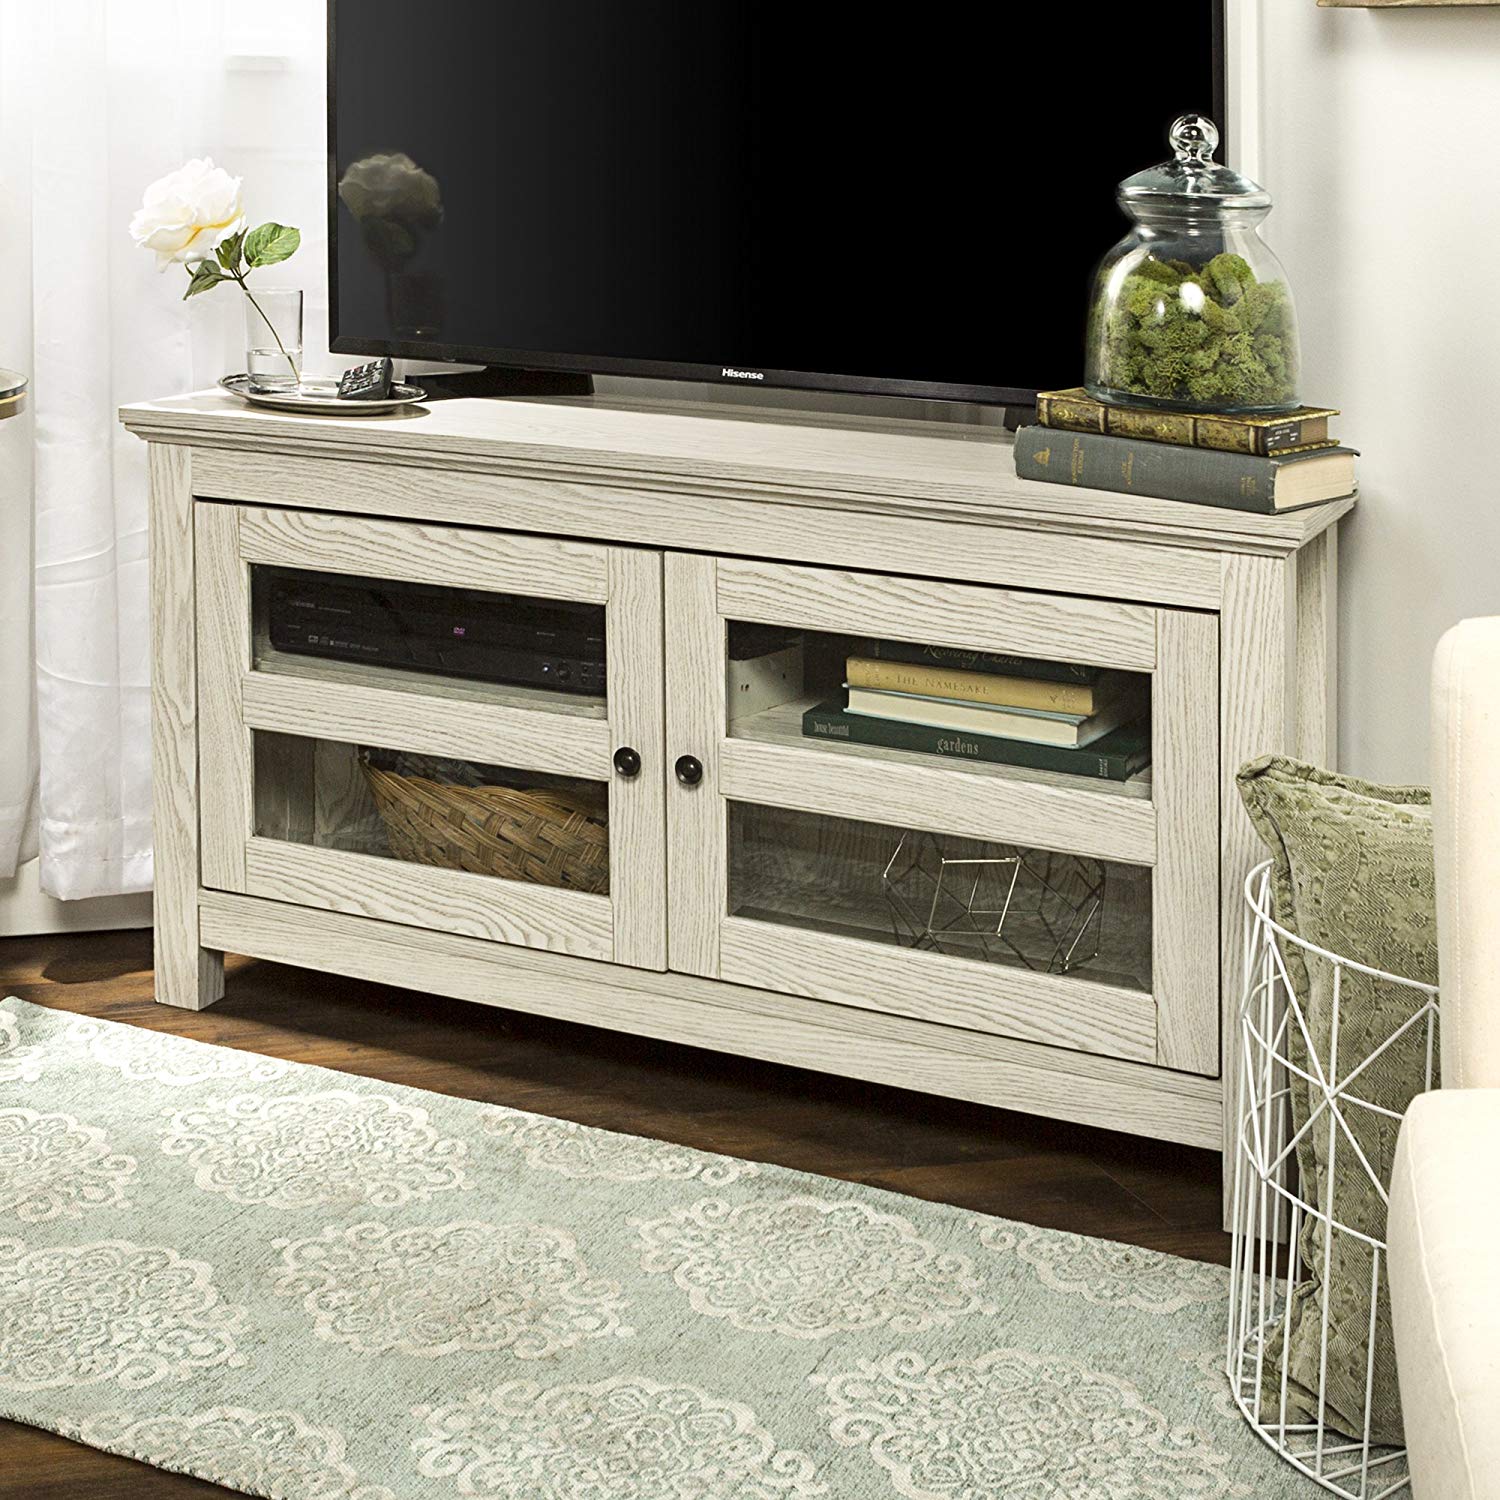 Top 10 Corner TV Stand in 2020 - Highly Recommend in 2020